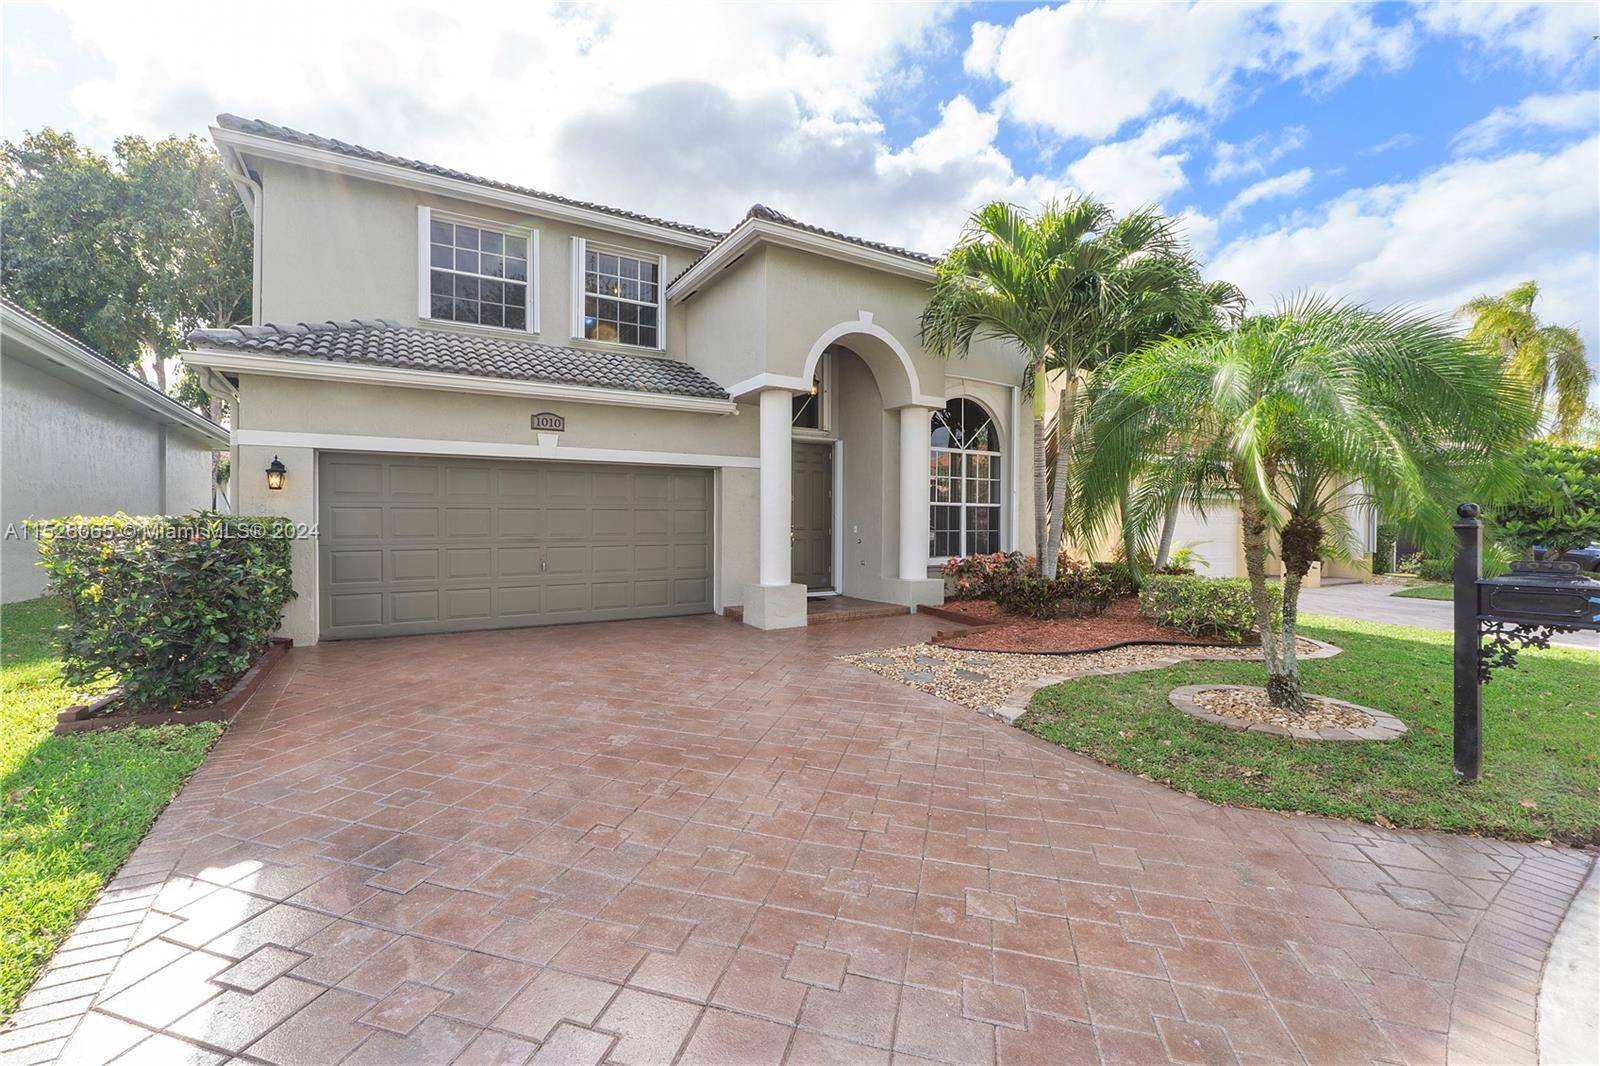 Come see this beautiful and immaculate, 4 Bedroom 3 Full Bath, 2 story, waterfront pool home with 1 bedroom full bath on first floor in desirable Lennox Isle !